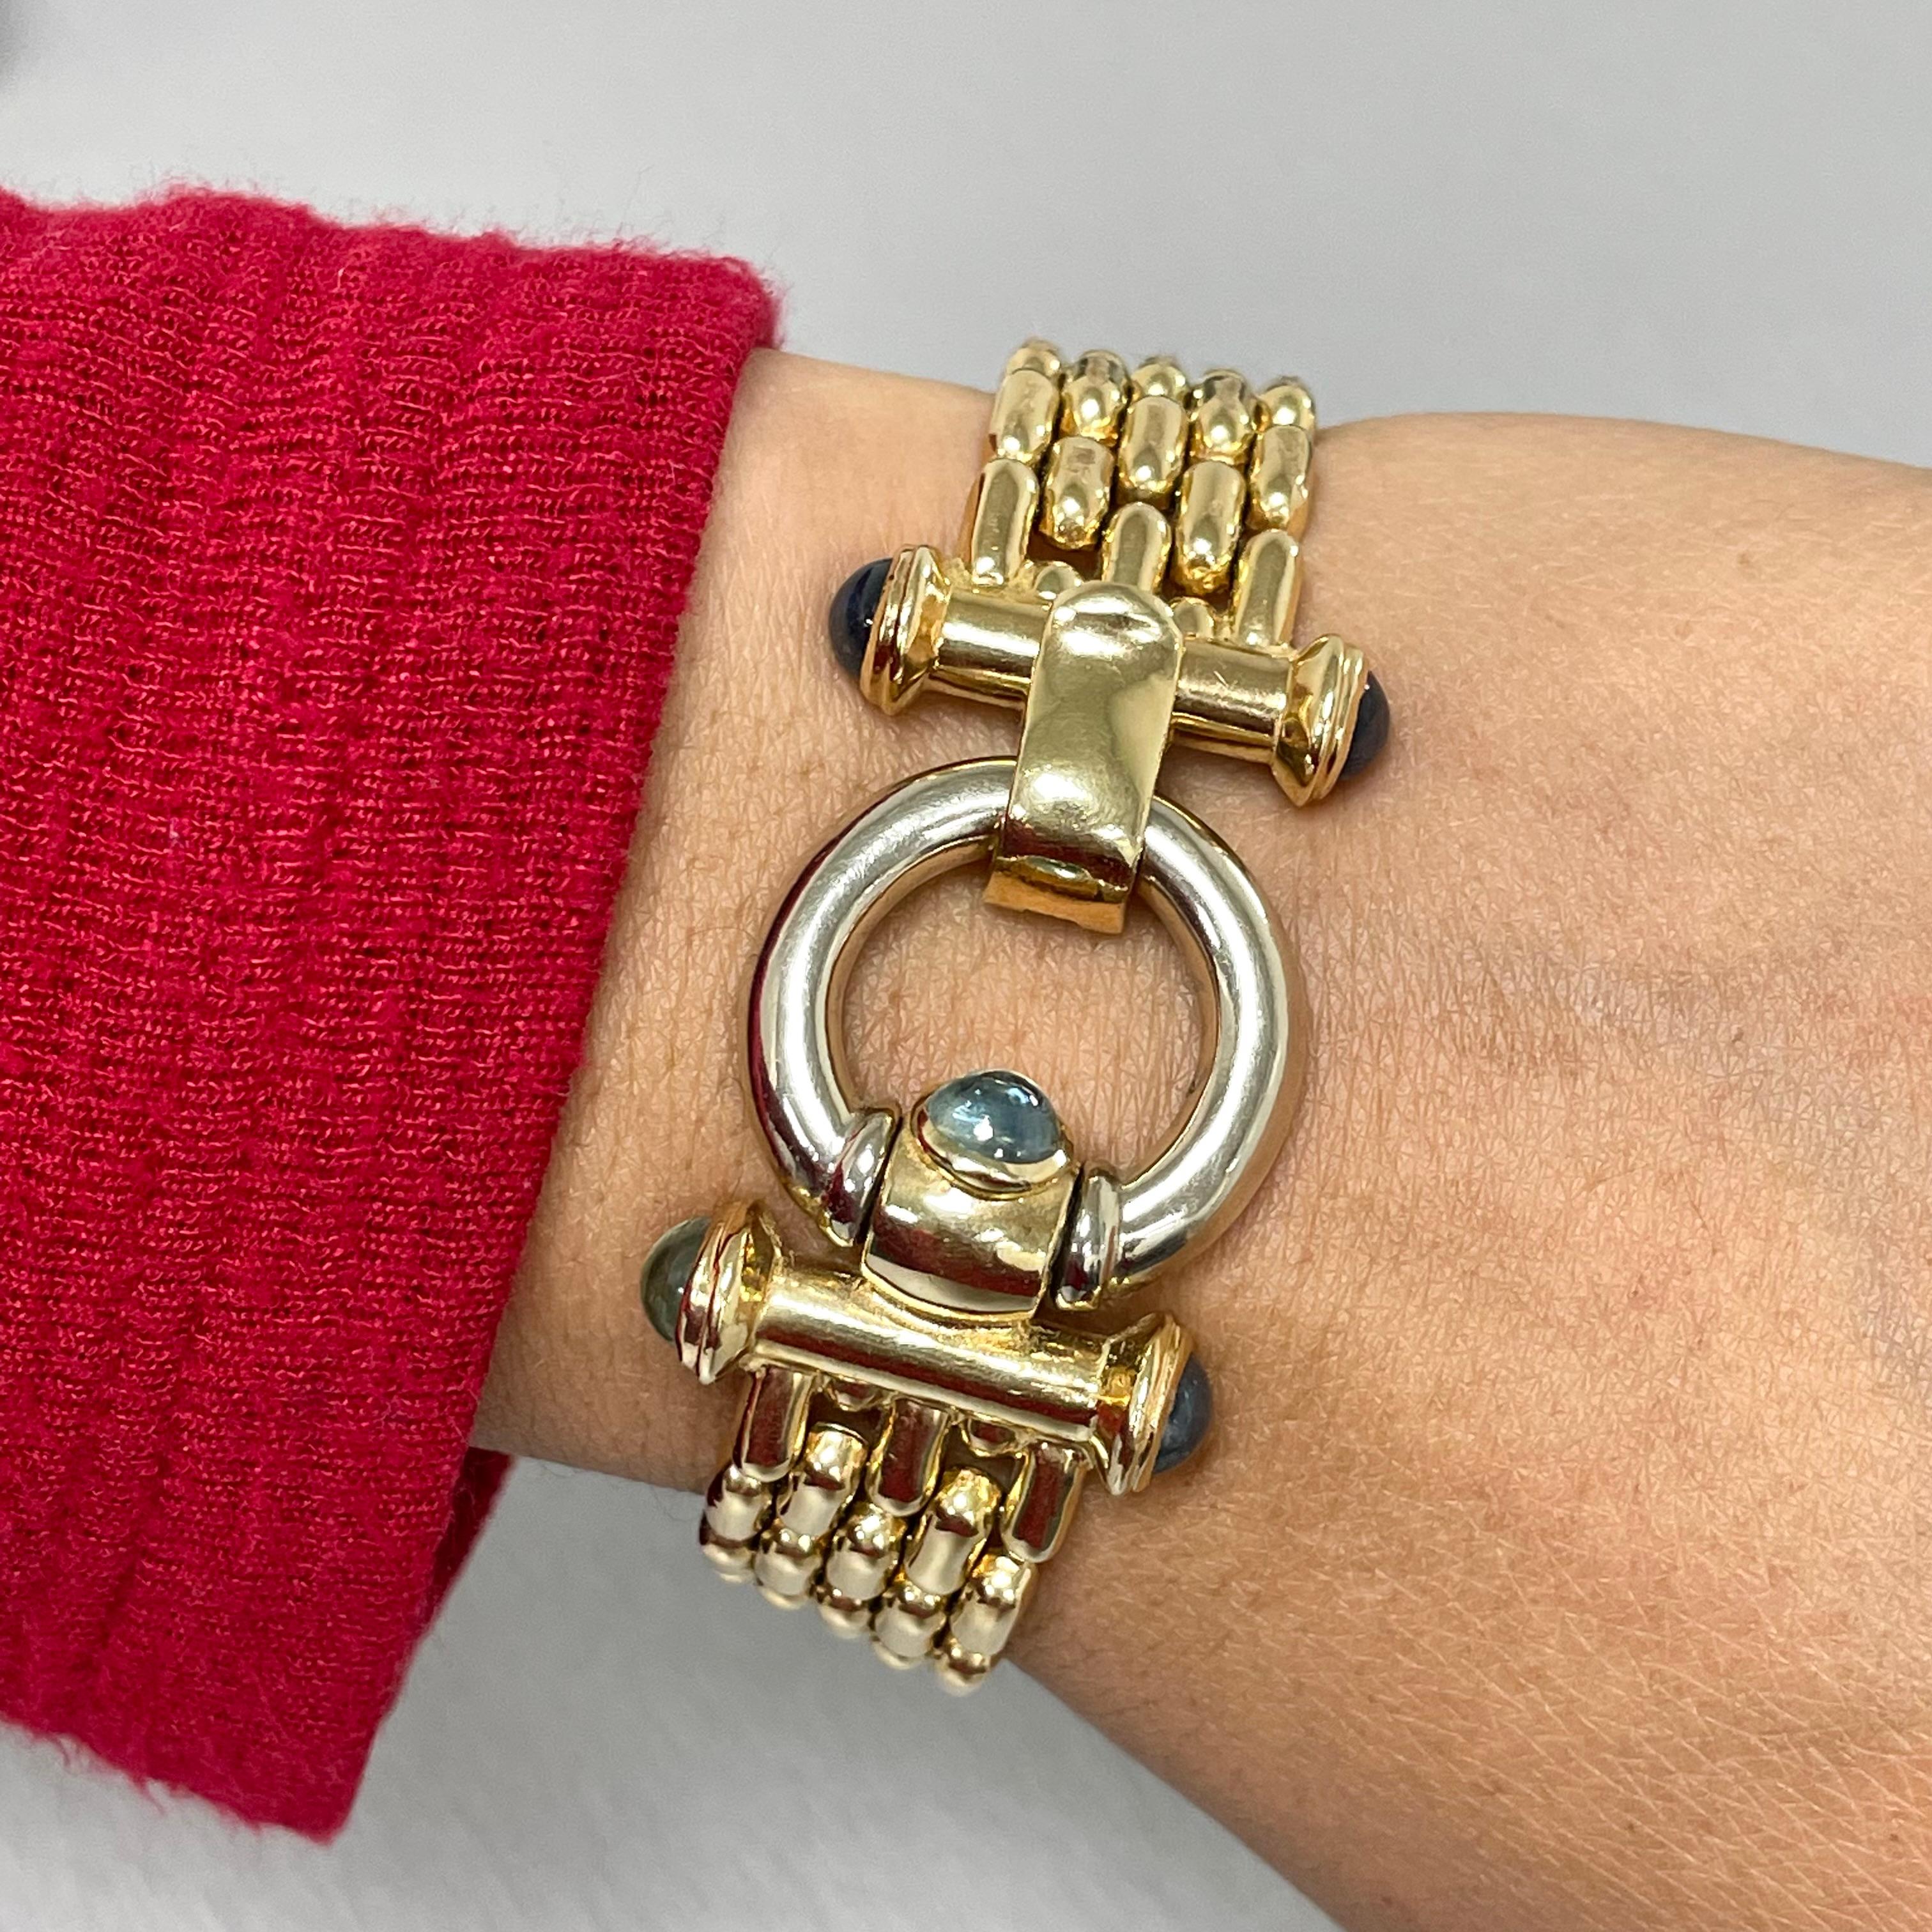 A burst of vintage glow, this yellow gold bracelet is all about warmth. The chain links flex and swerve against the skin feeling delicate yet powerful. The unique loop lock is a design element that can be sported and flaunted or hidden on the inside